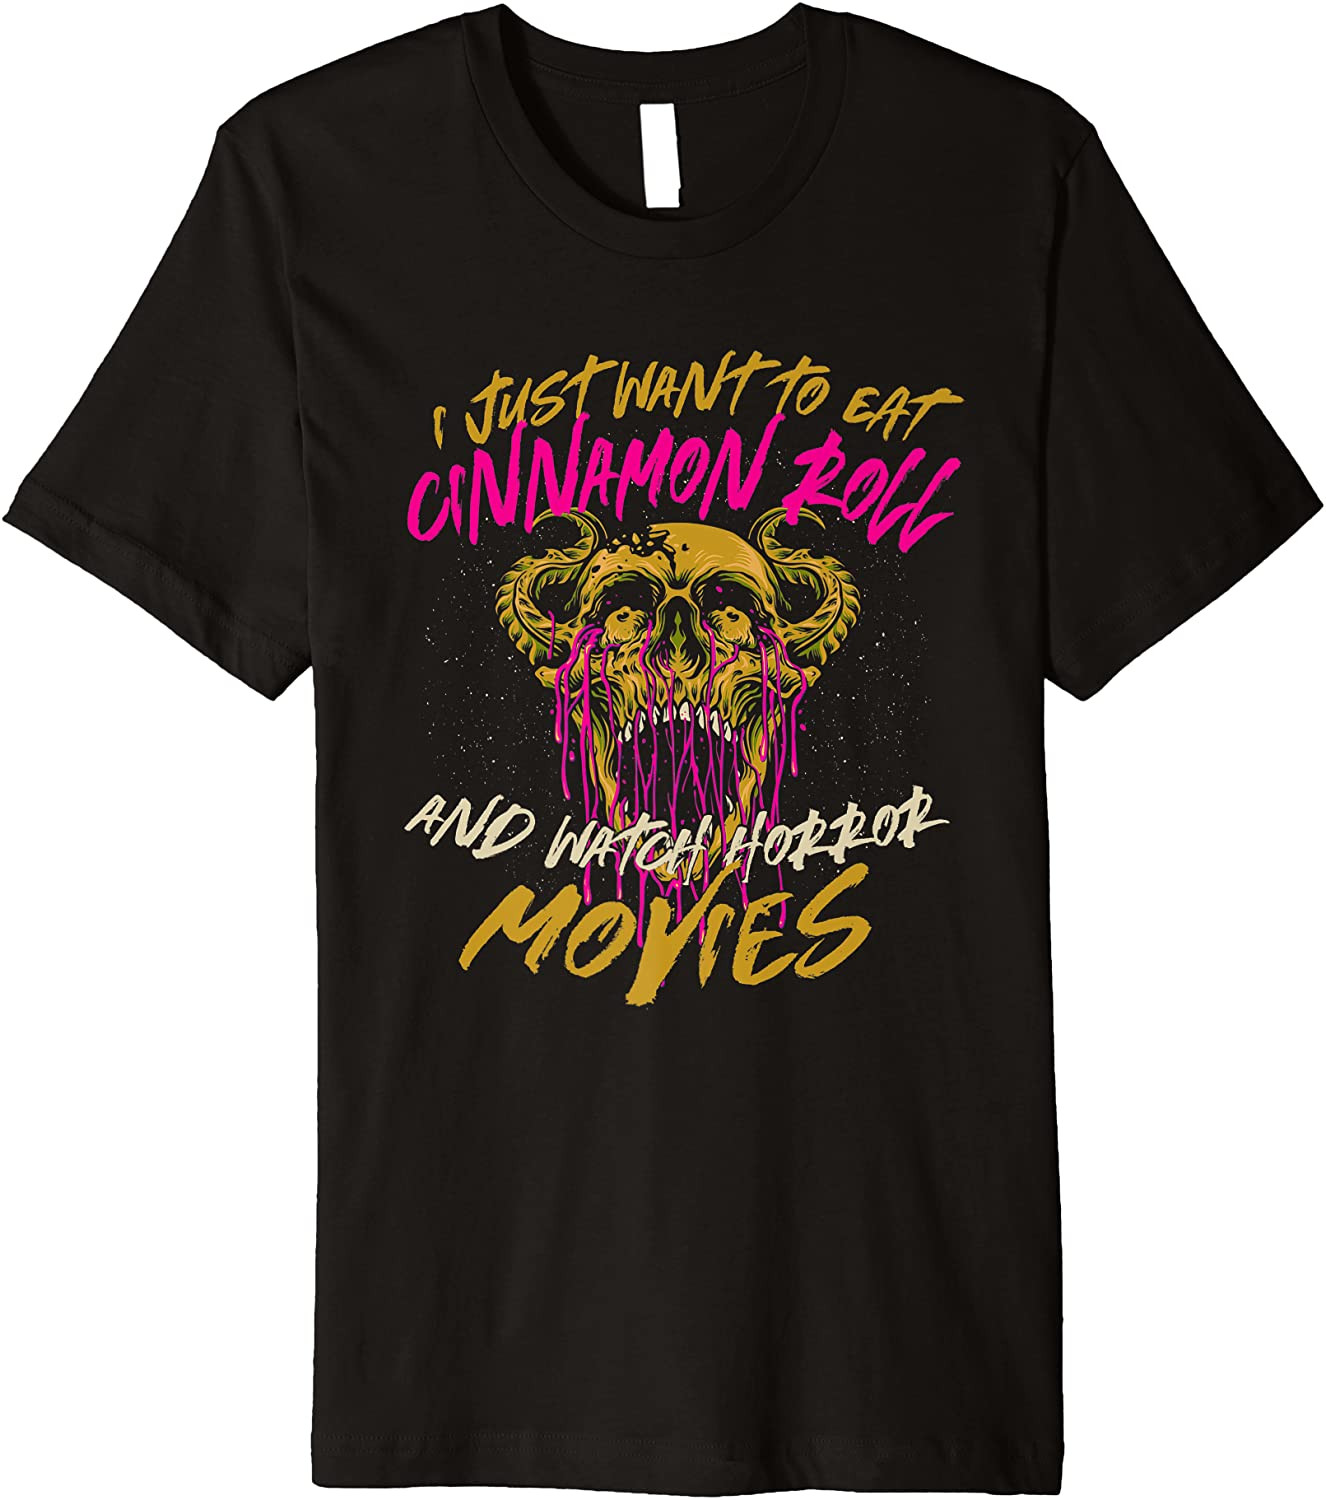 Eat Cinnamon Roll And Watch Horror Movies Comfort Food T-Shirt